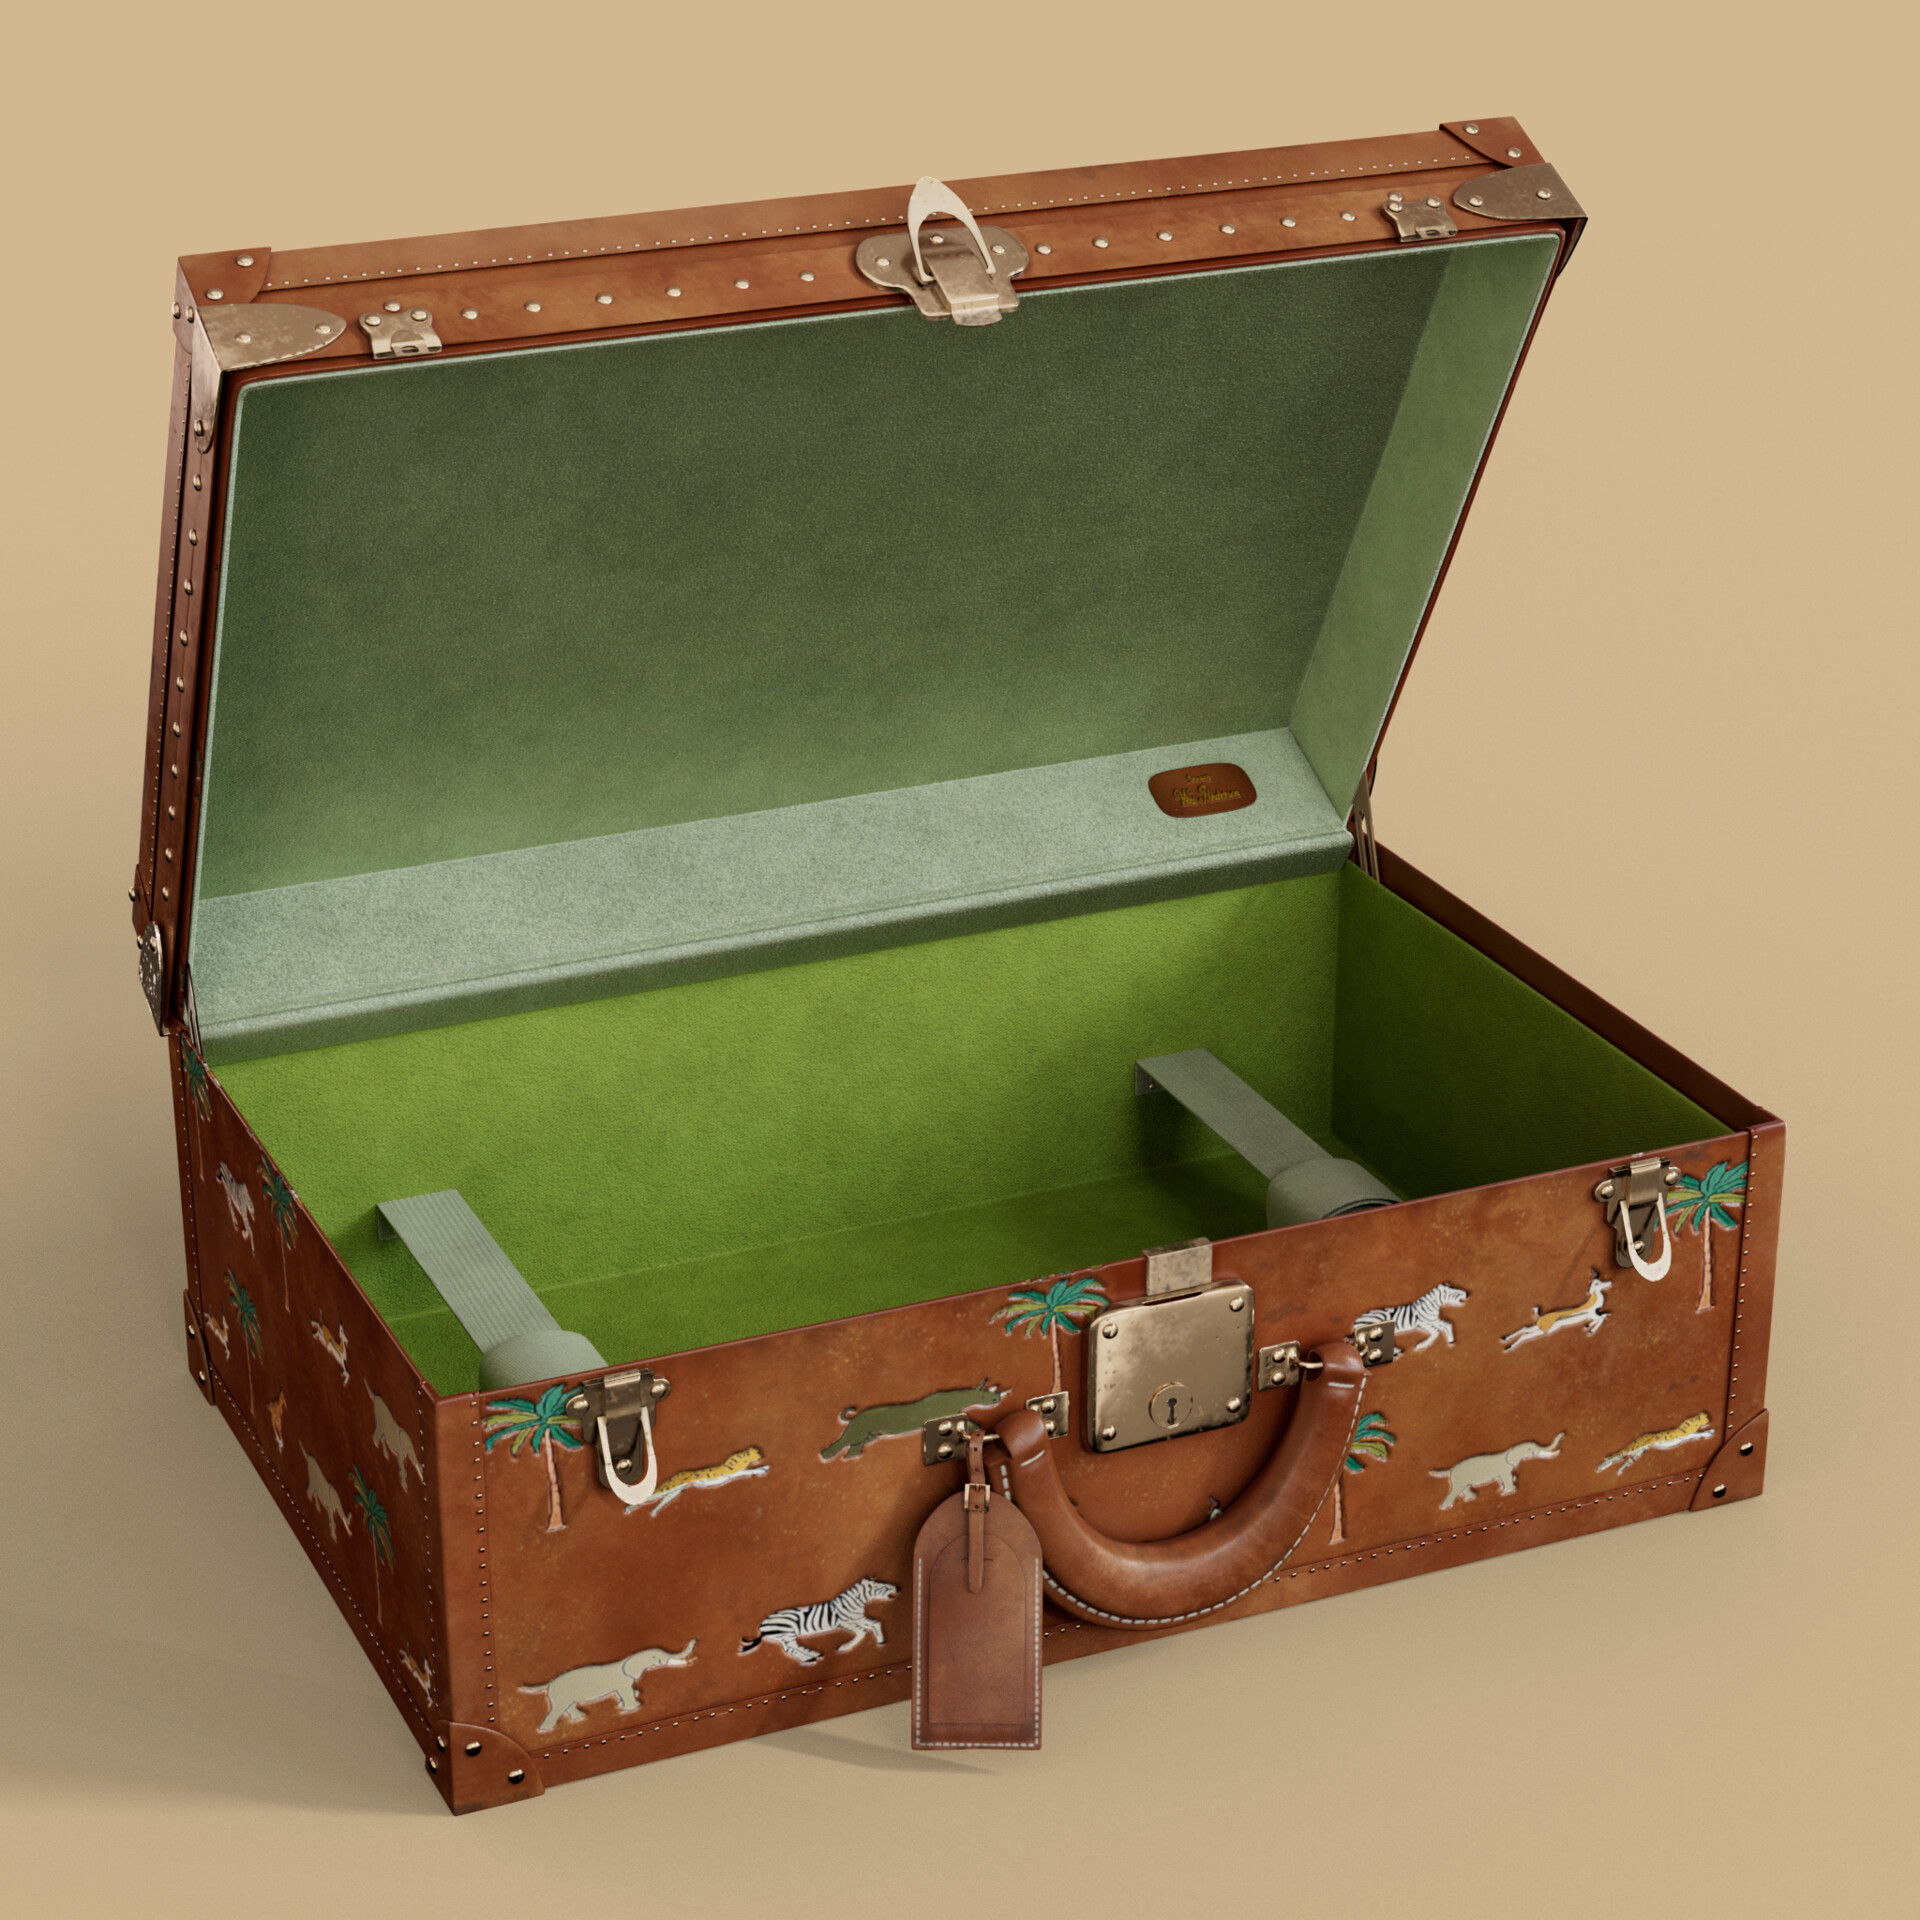 WES ANDERSON INSPIRED LUGGAGE - The Rebel Dandy